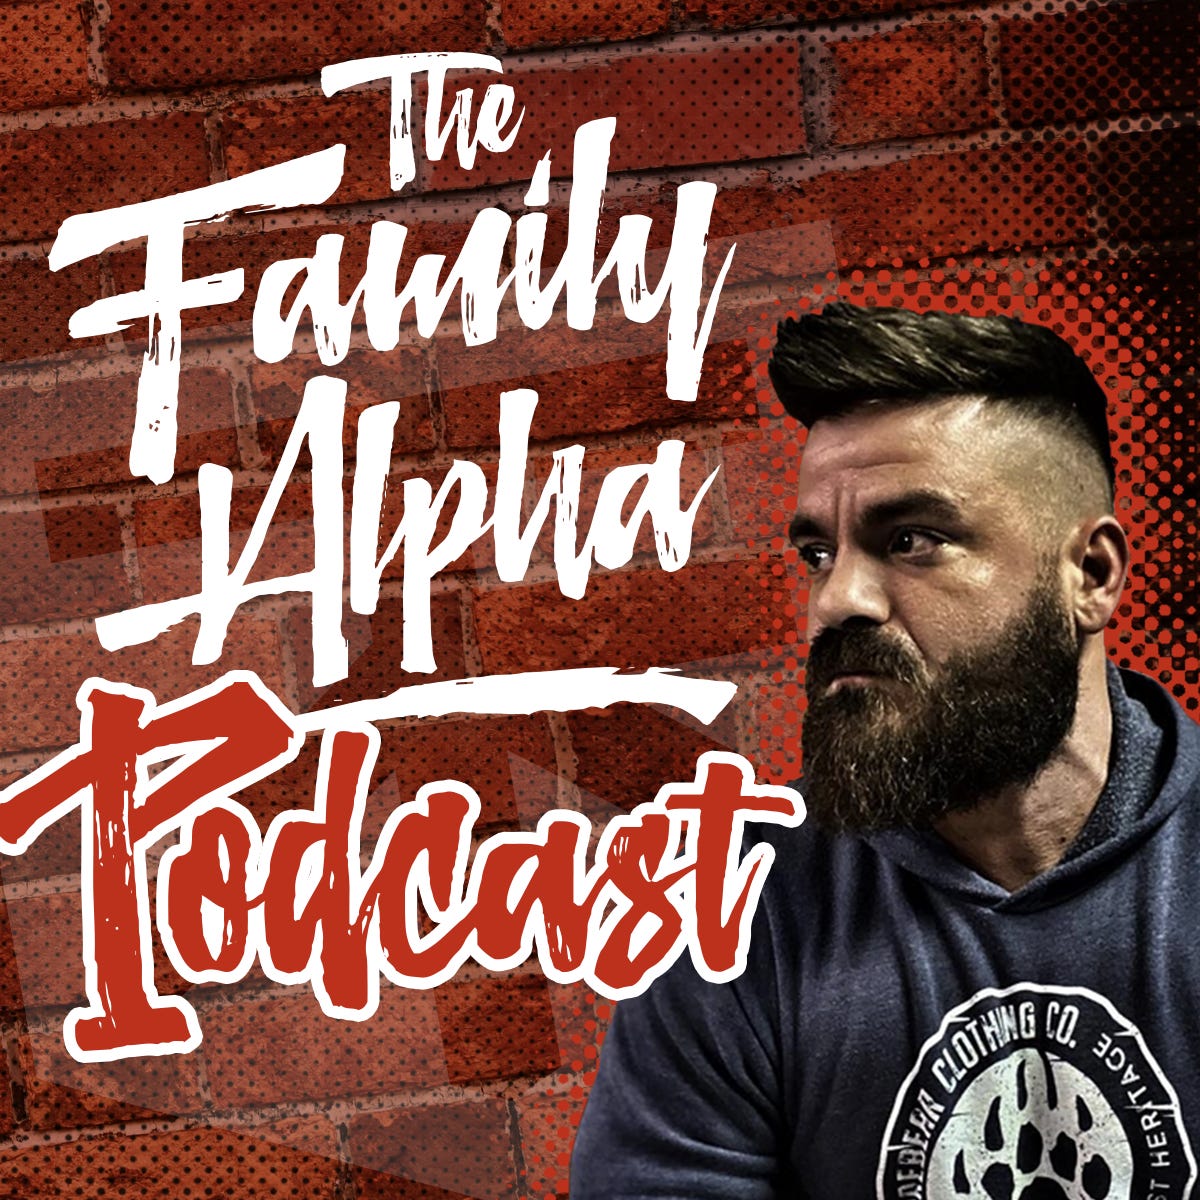 Ep. 211: Fraternity Friday 03 - From Runner to Photographer to BJJ Phillip Capaldi Shares How a Man Controls His Fate